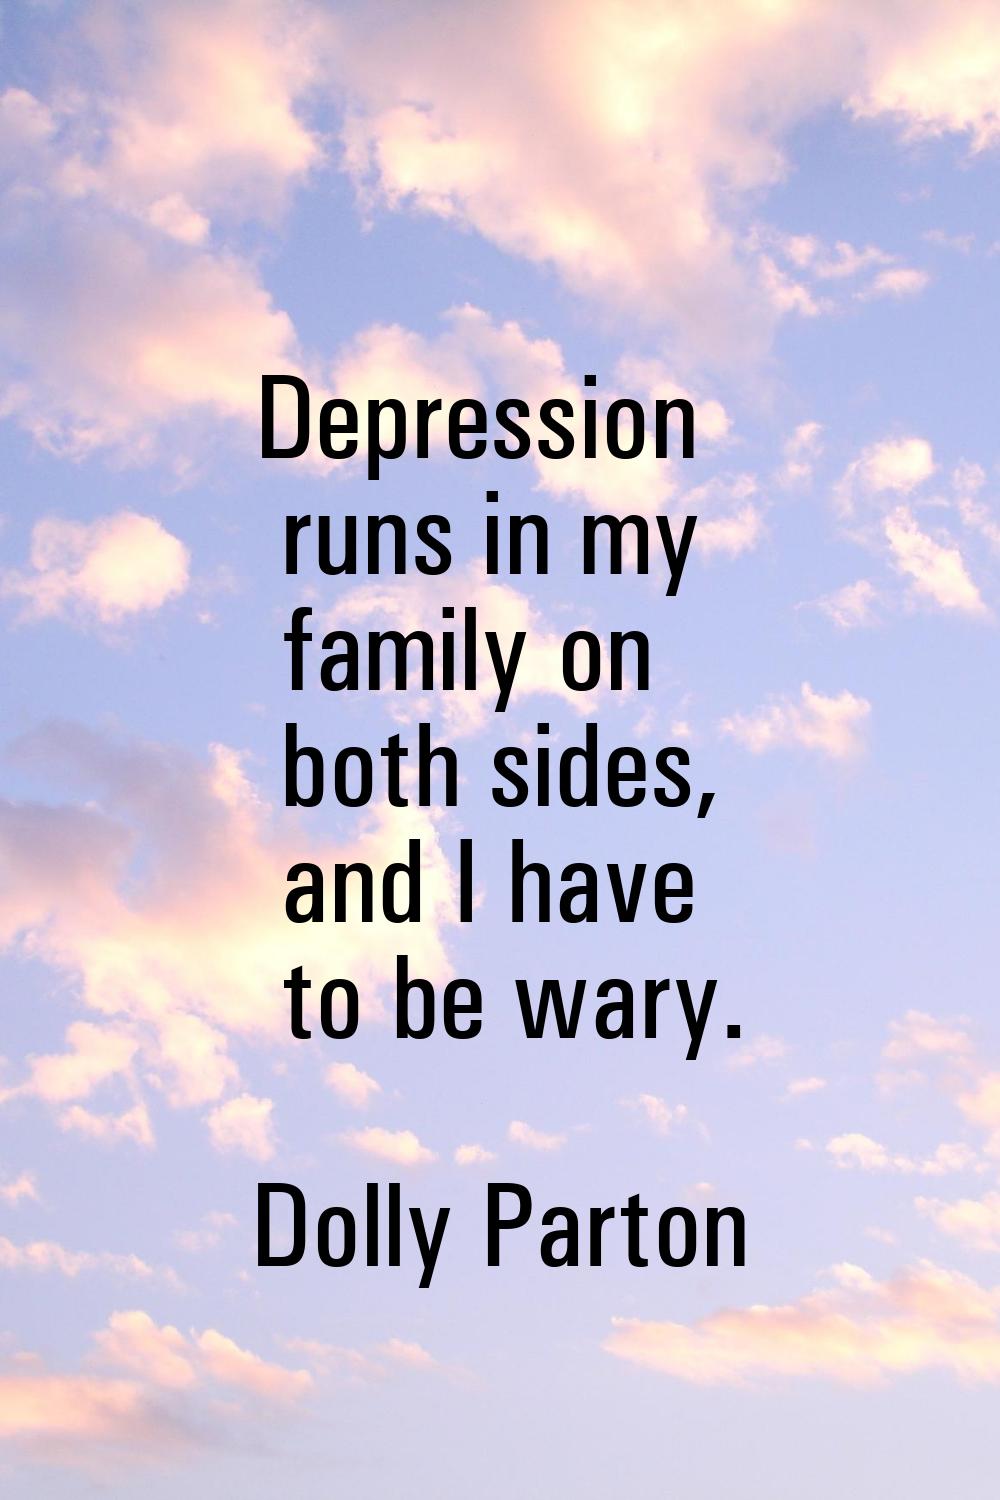 Depression runs in my family on both sides, and I have to be wary.